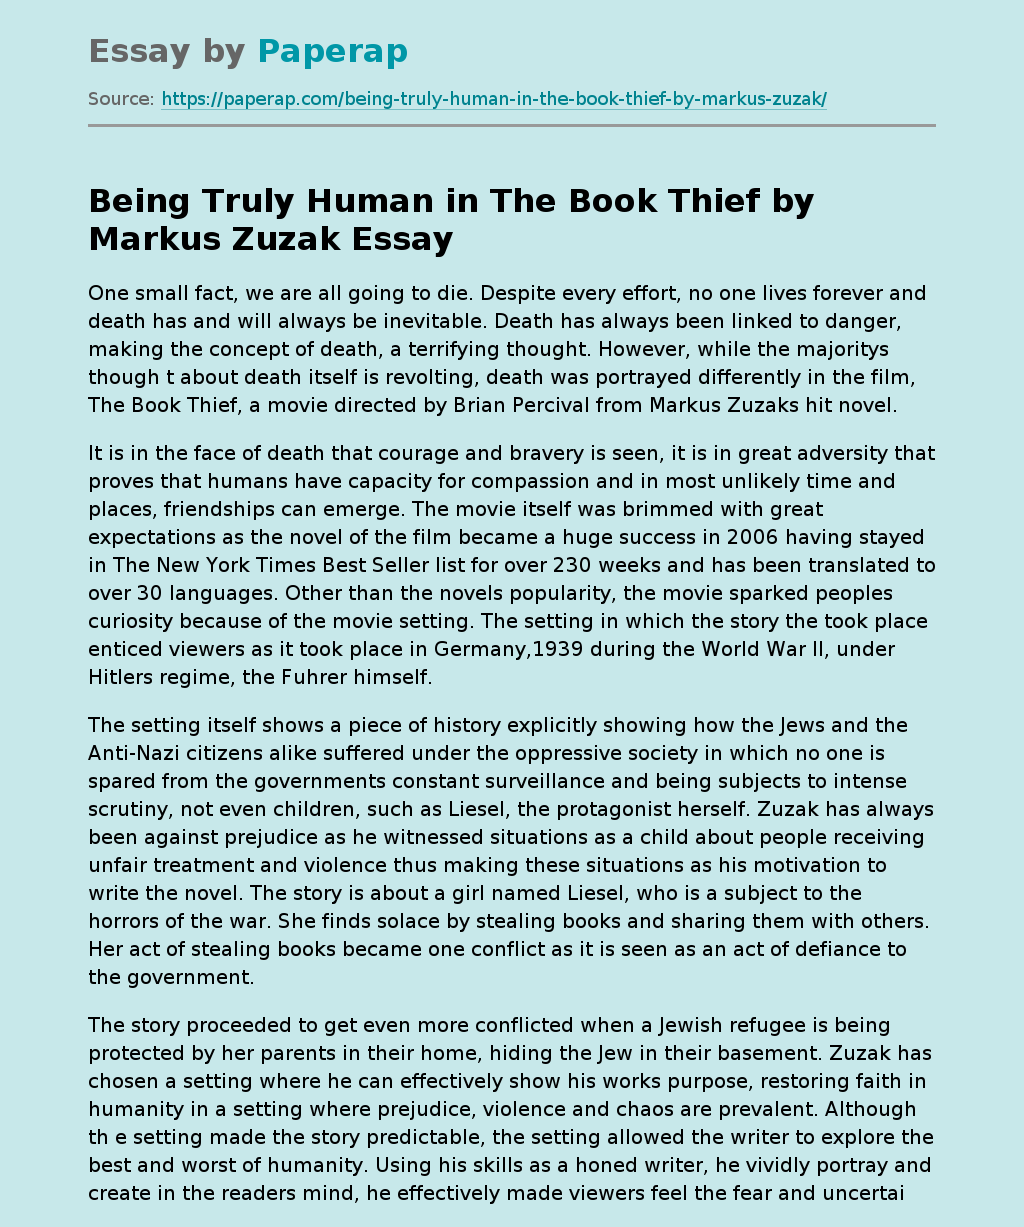 Being Truly Human in "The Book Thief" by Markus Zuzak